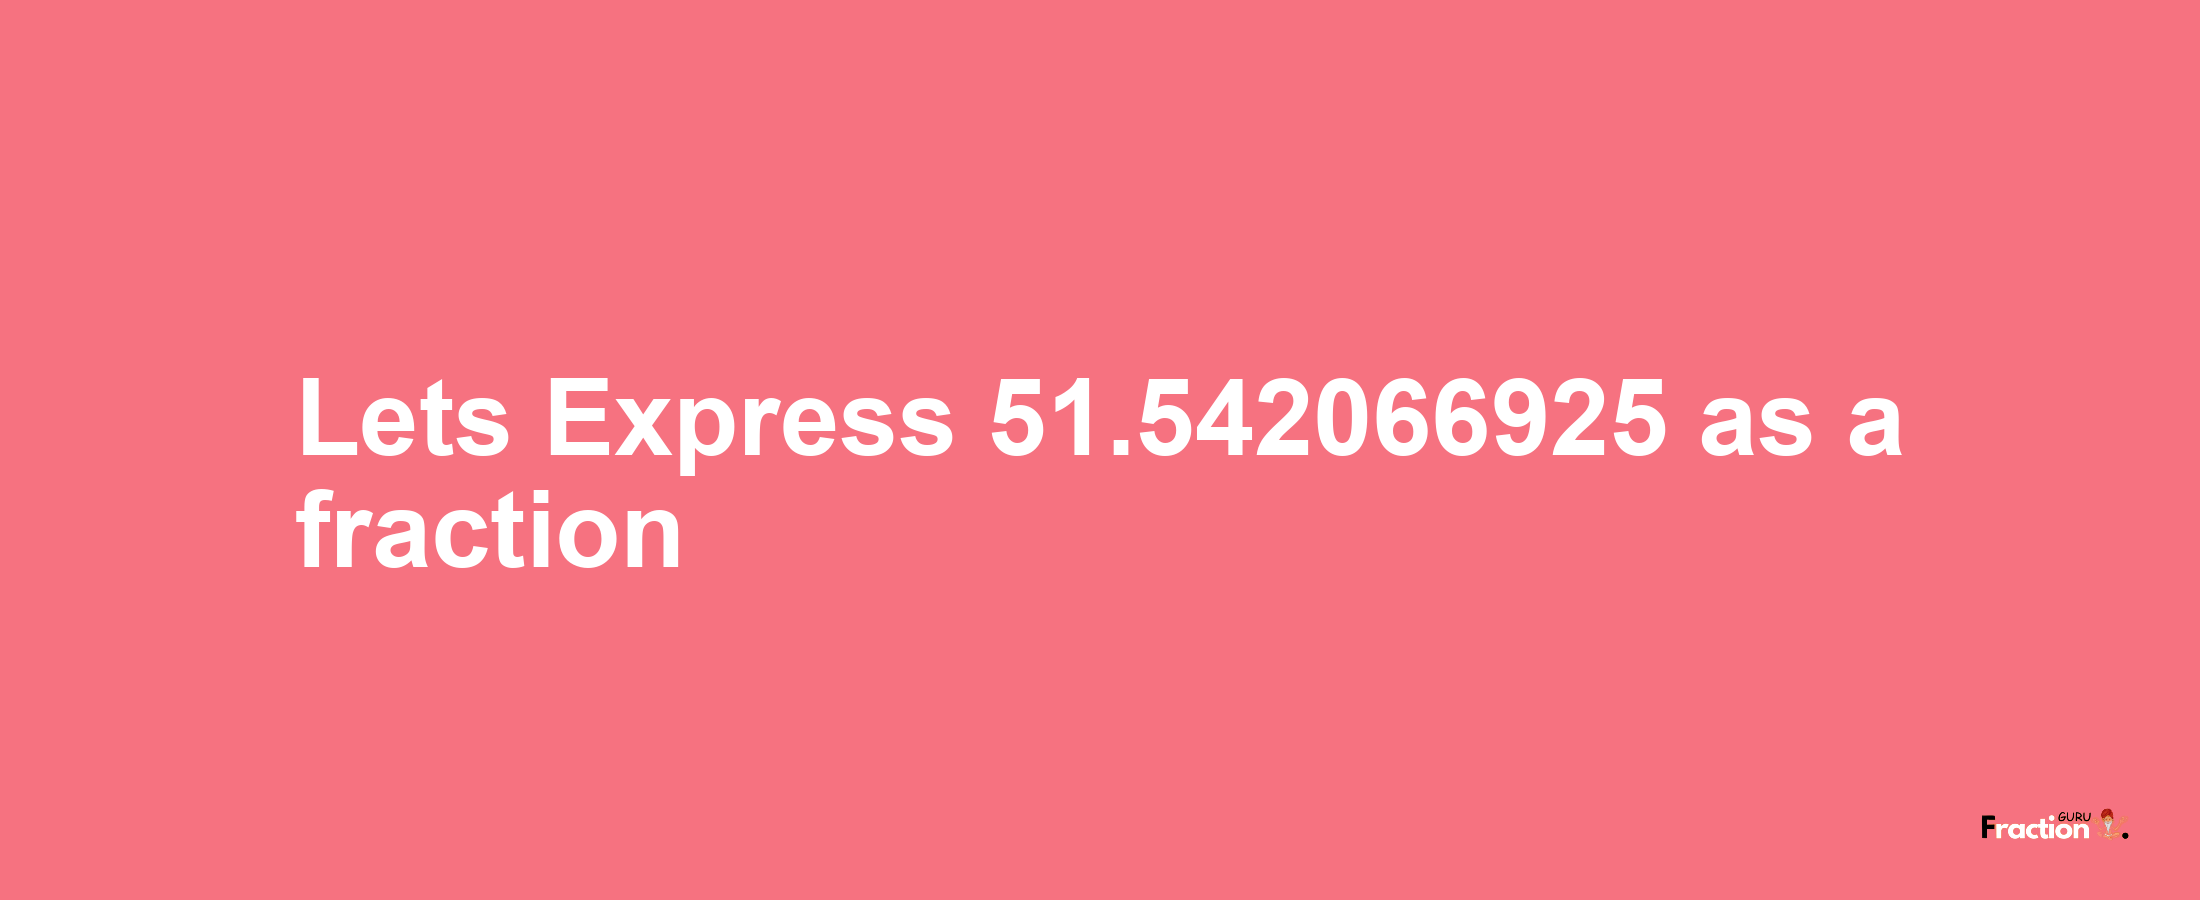 Lets Express 51.542066925 as afraction